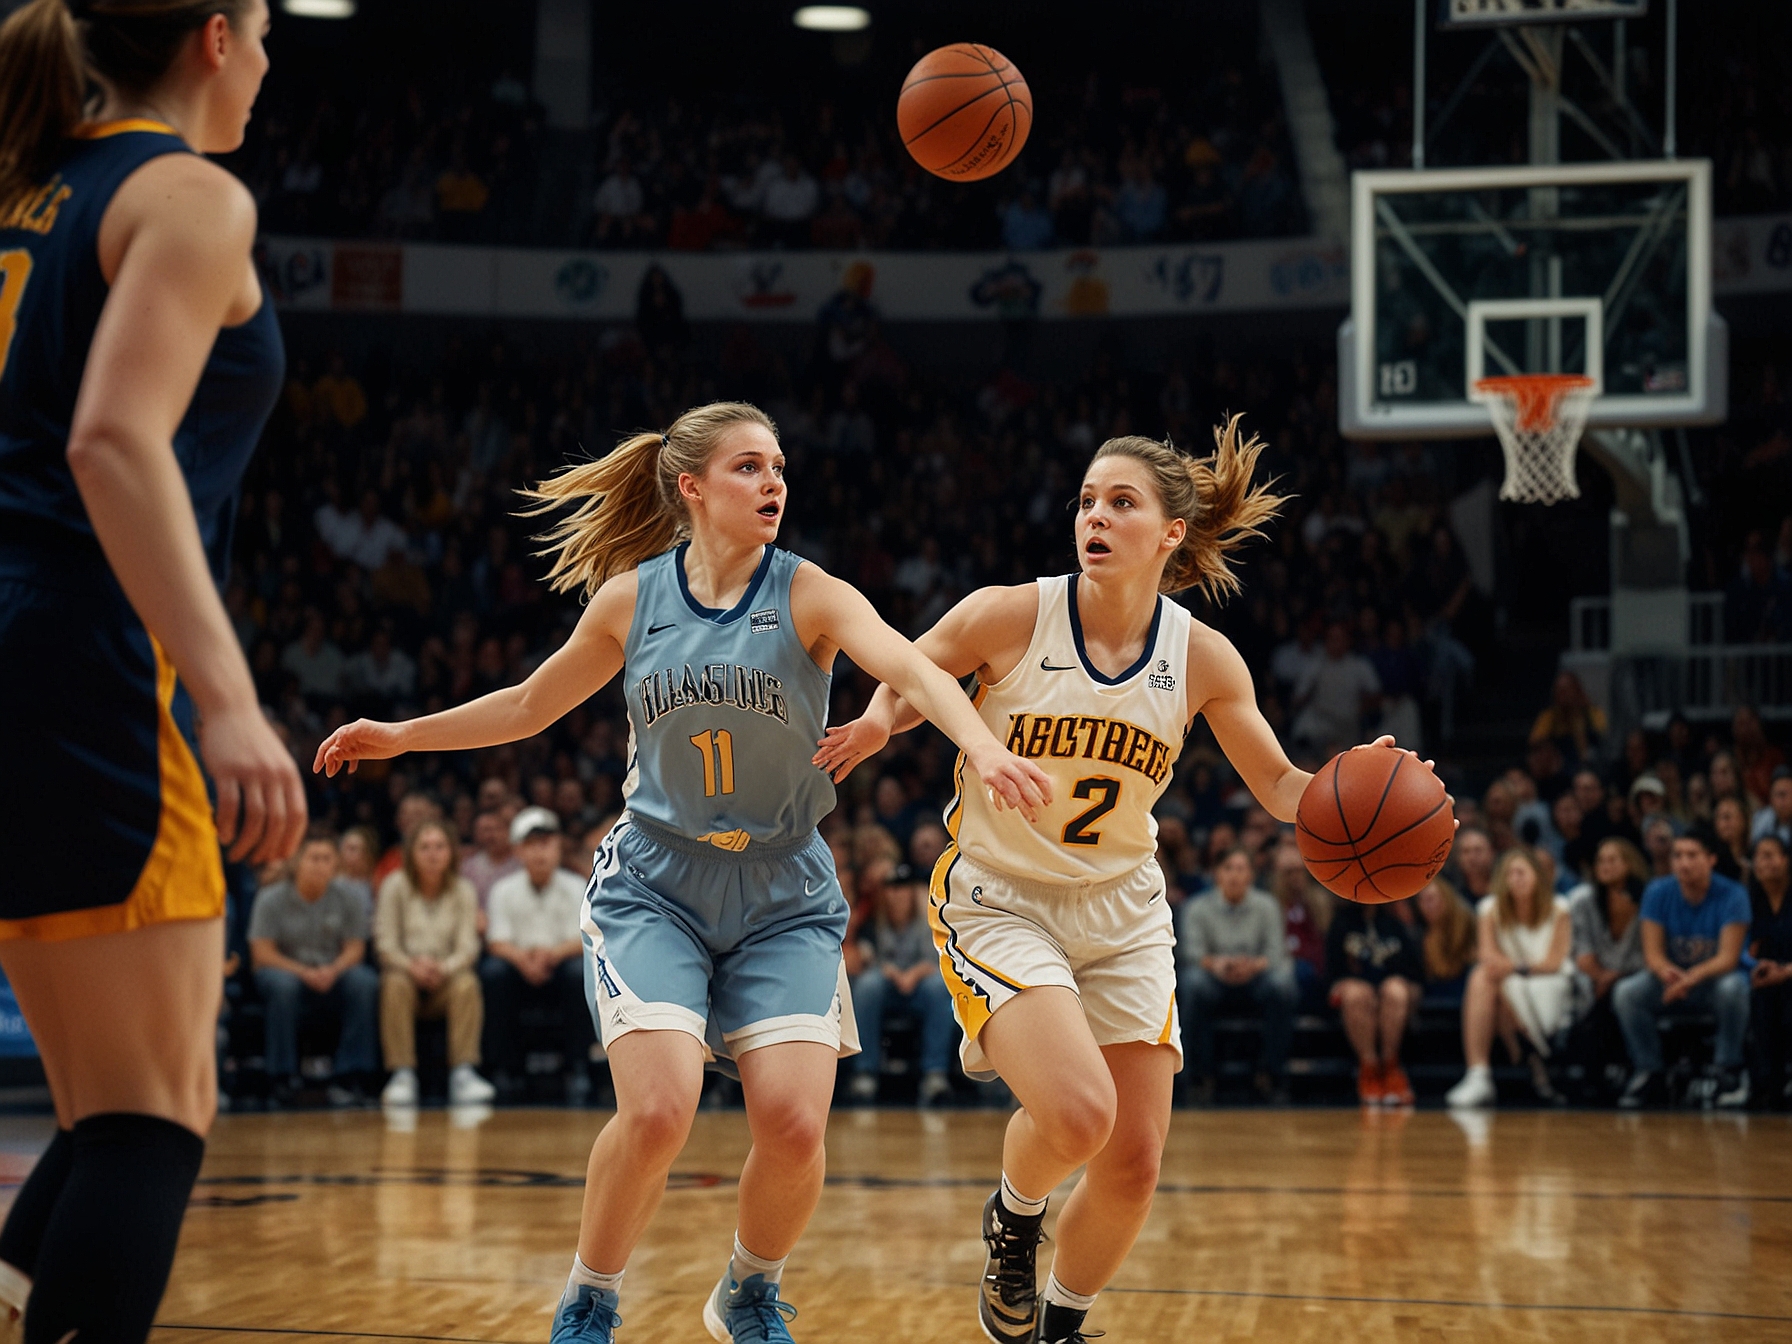 Angel Reese, in her team uniform, intercepts Caitlin Clark during a tense basketball game, leading to a controversial flagrant foul call. The arena is filled with an electrified crowd.